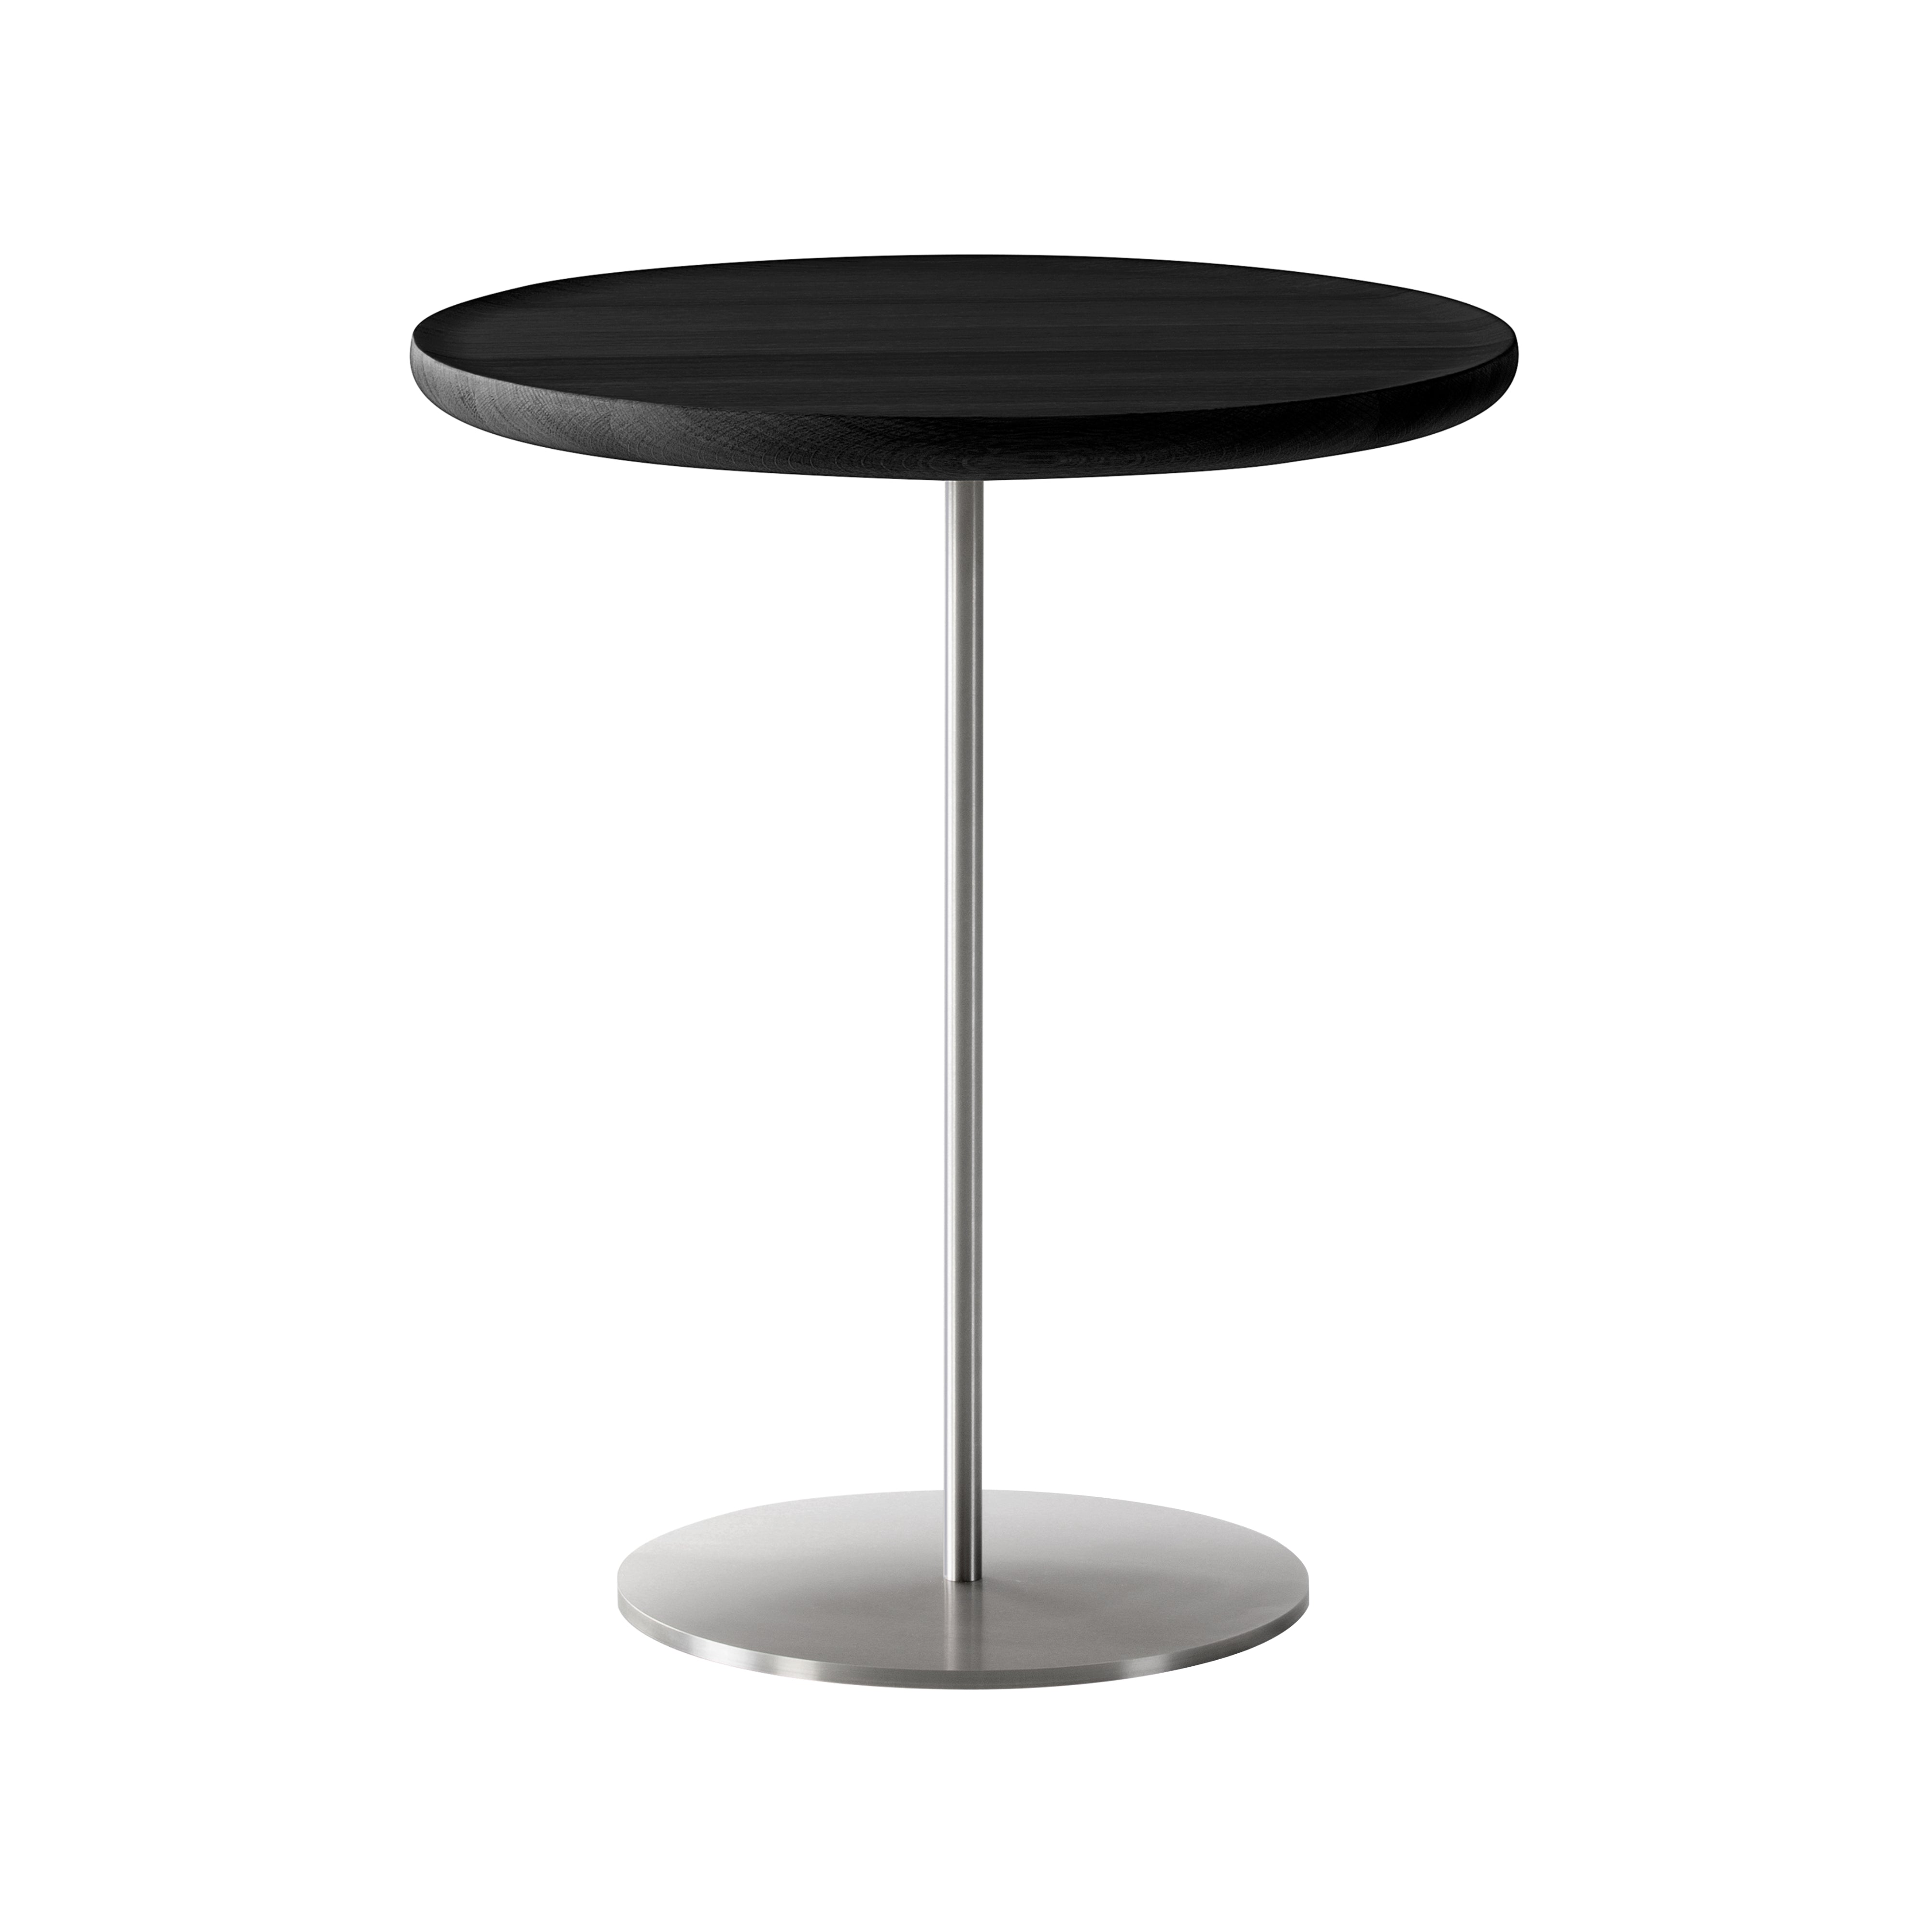 Pal Table: Large + High + Black Lacquered Oak + Stainless Steel